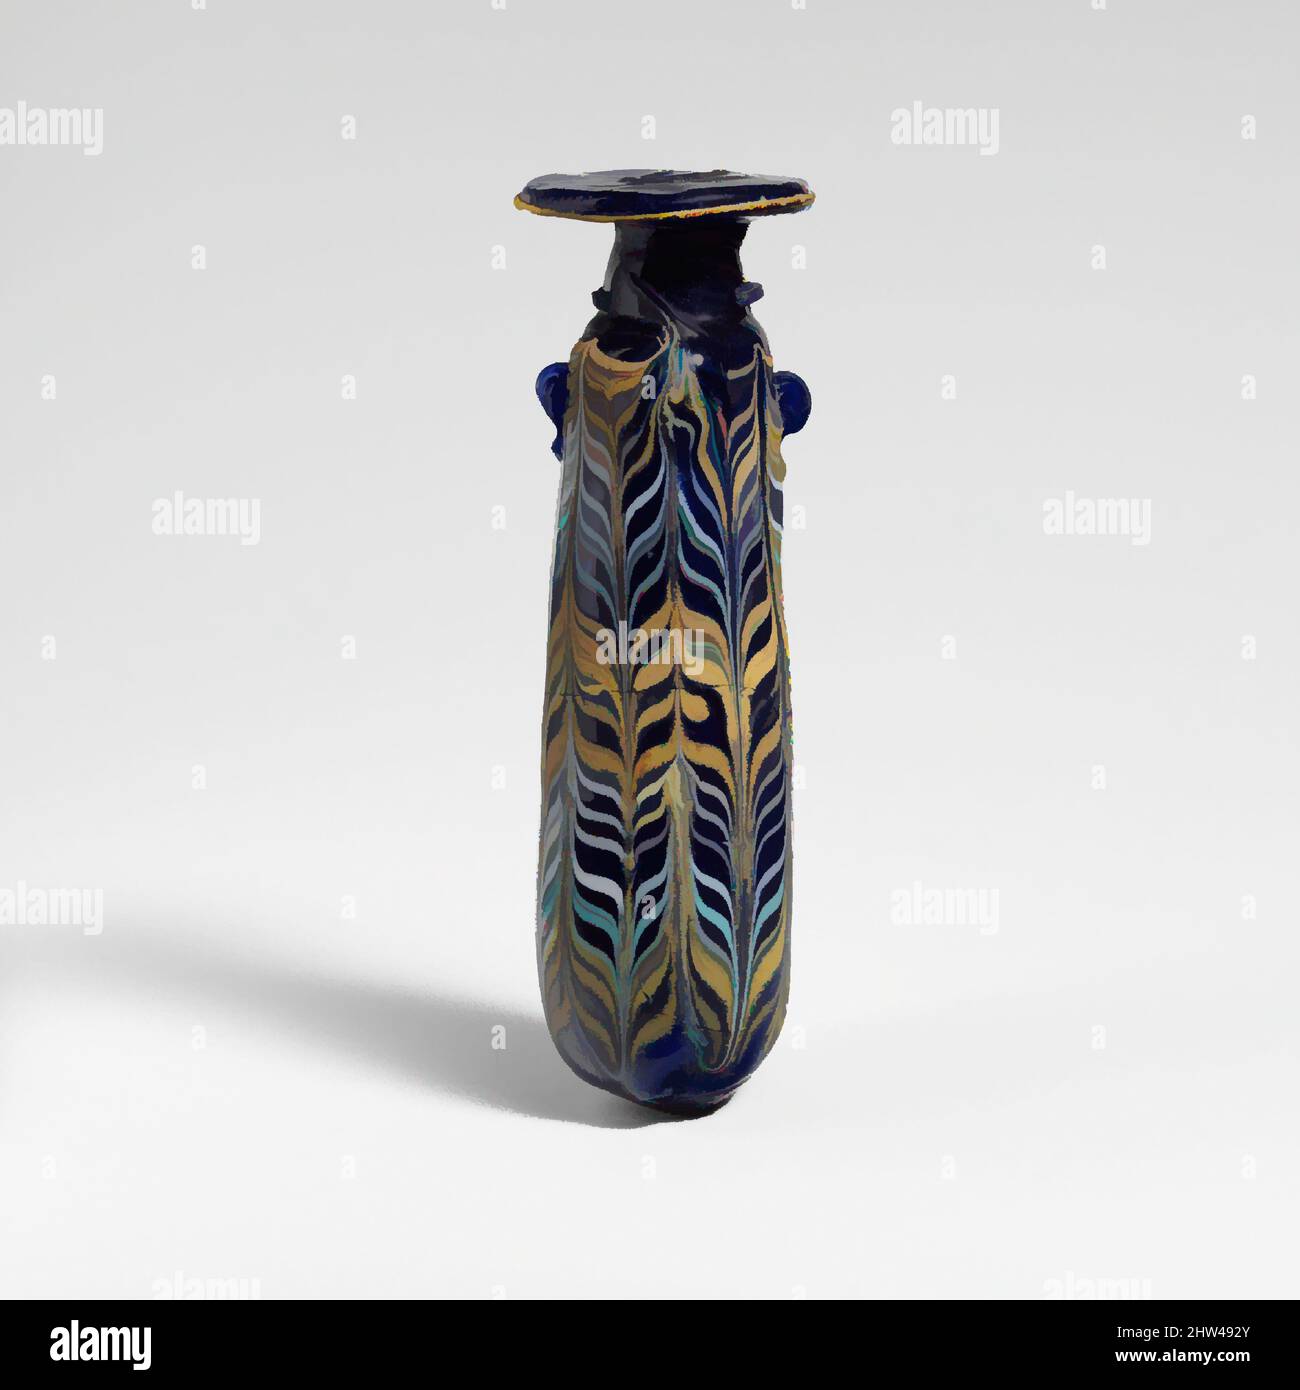 Art inspired by Glass alabastron (perfume bottle), Hellenistic, late 4th–early 3rd century B.C., Greek, Eastern Mediterranean or Italian, Glass; core-formed, Group II, H.: 5 1/8 in. (13 cm), Glass, Translucent cobalt blue, with handles in same color; trails in opaque yellow, opaque, Classic works modernized by Artotop with a splash of modernity. Shapes, color and value, eye-catching visual impact on art. Emotions through freedom of artworks in a contemporary way. A timeless message pursuing a wildly creative new direction. Artists turning to the digital medium and creating the Artotop NFT Stock Photo